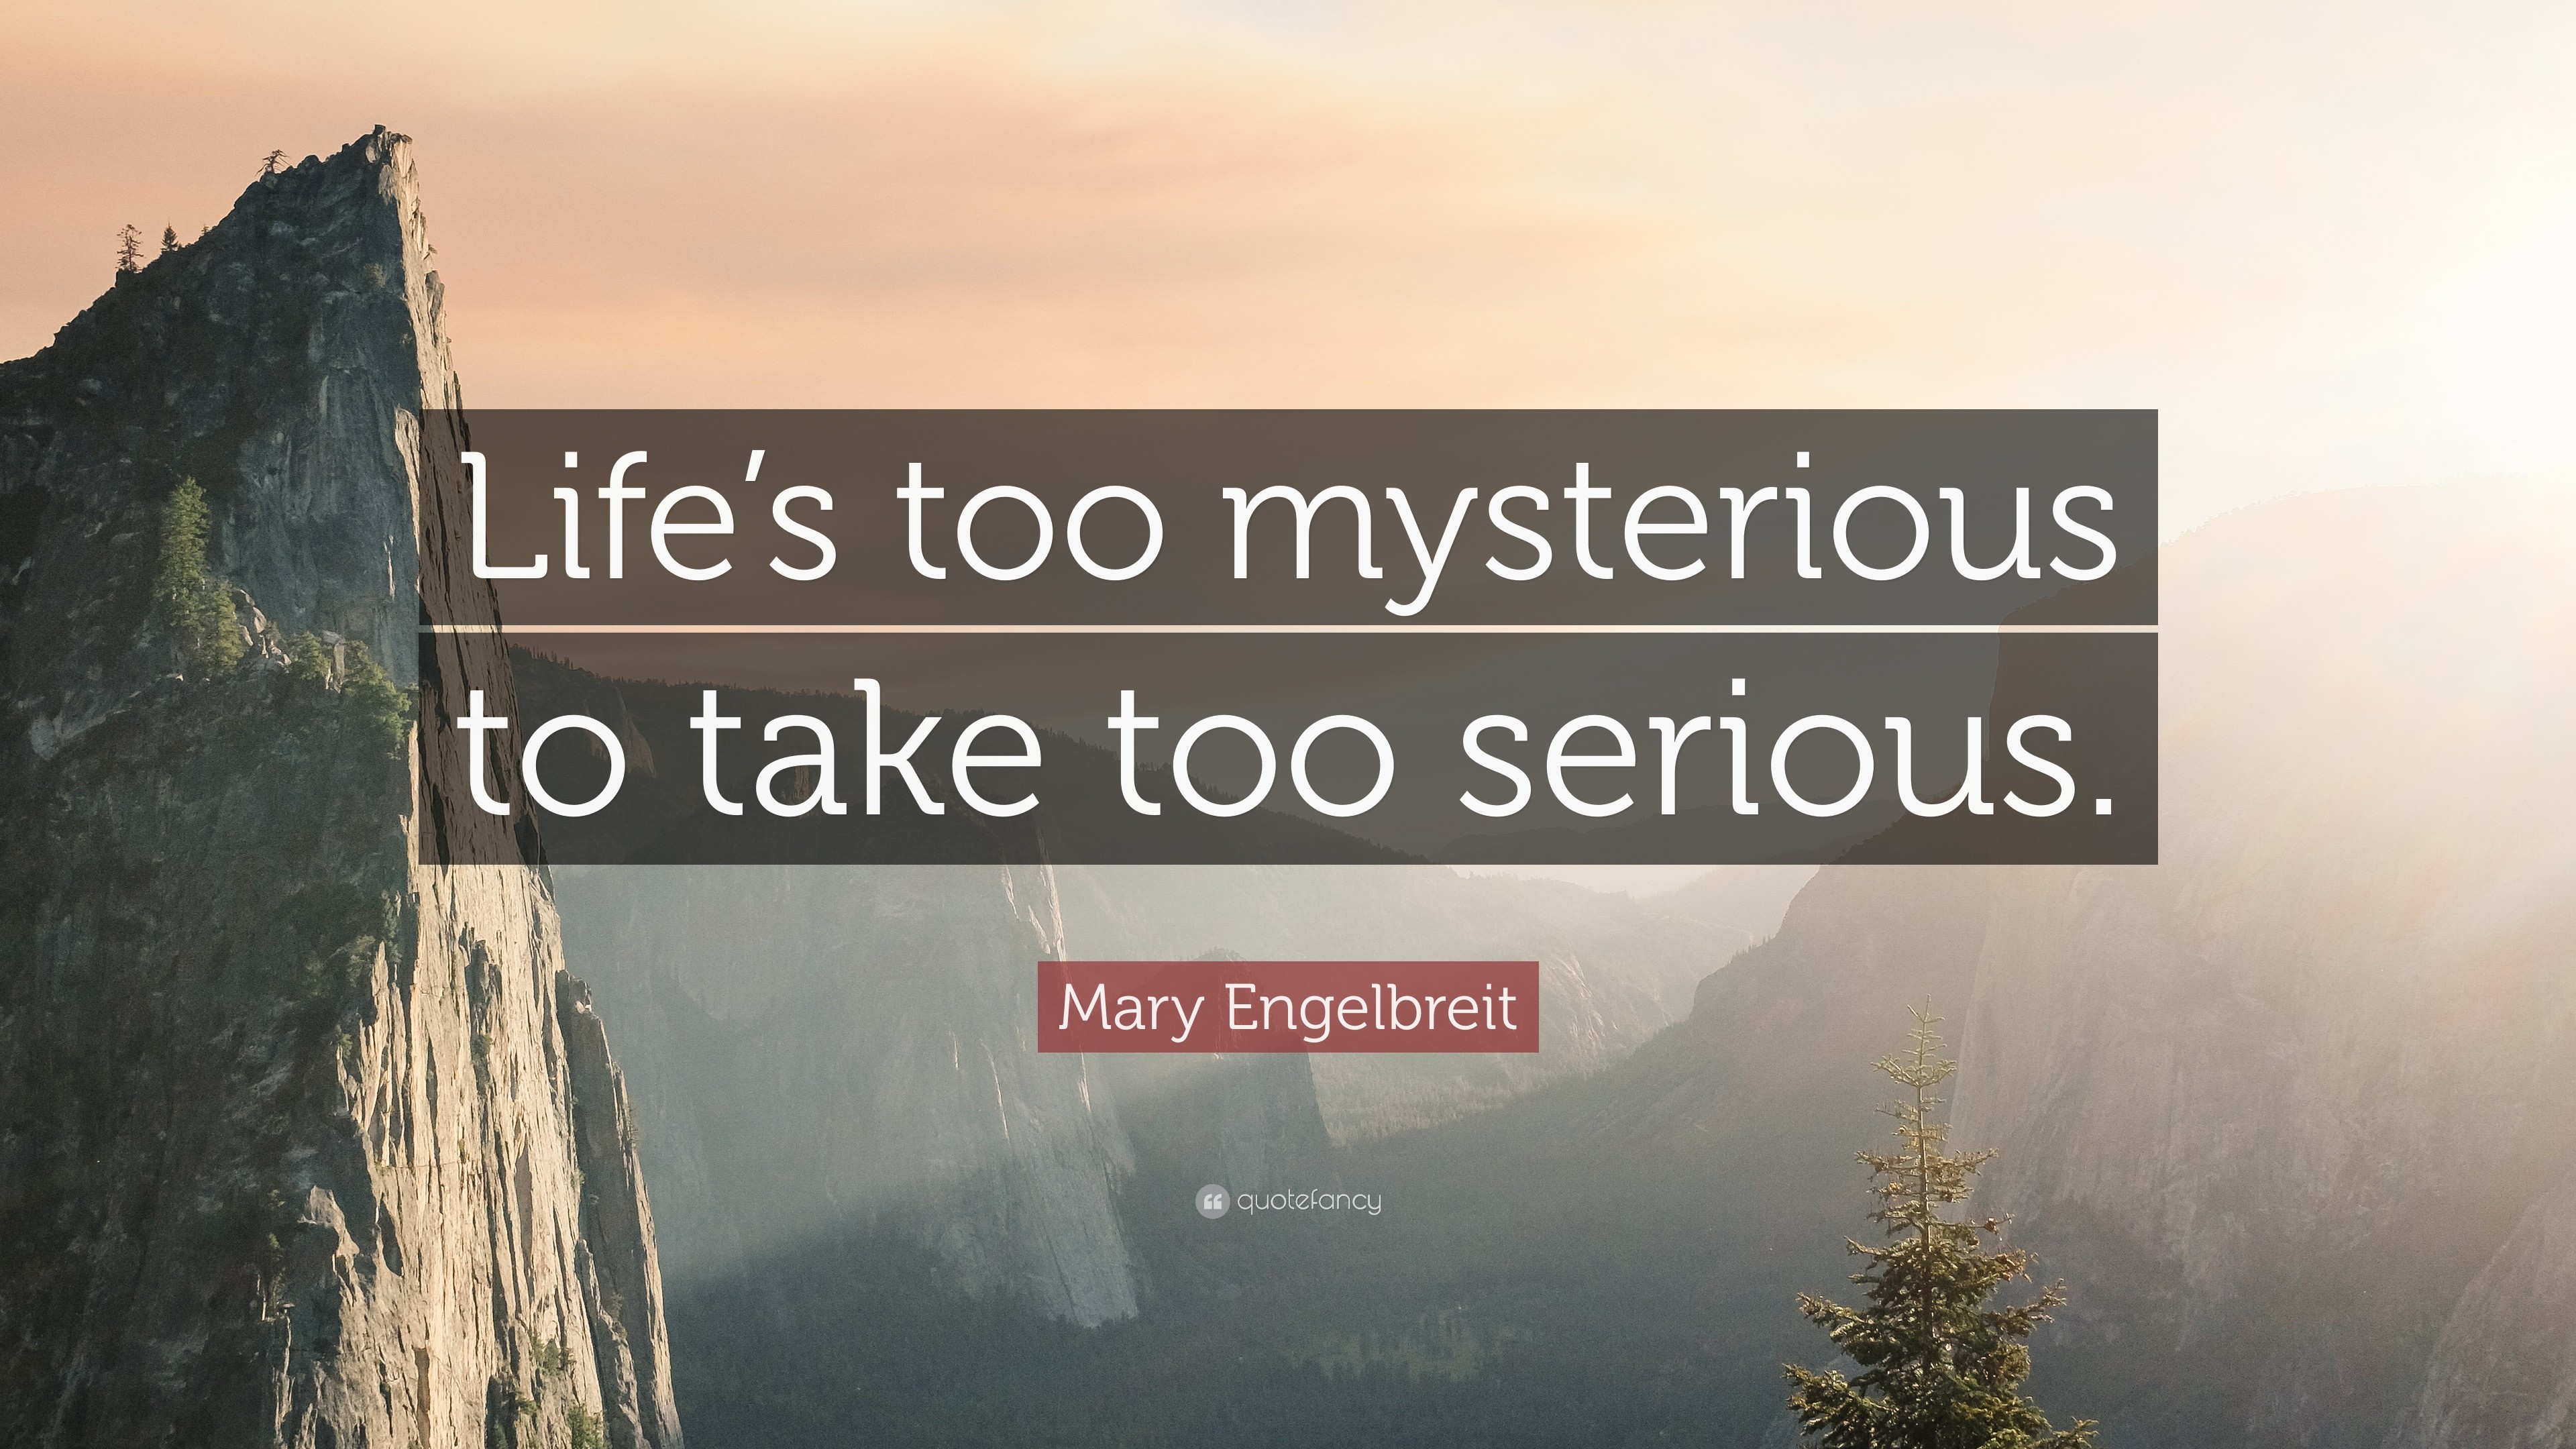 3840x2160 Mary Engelbreit Quote: “Life's too mysterious to take too serious.”